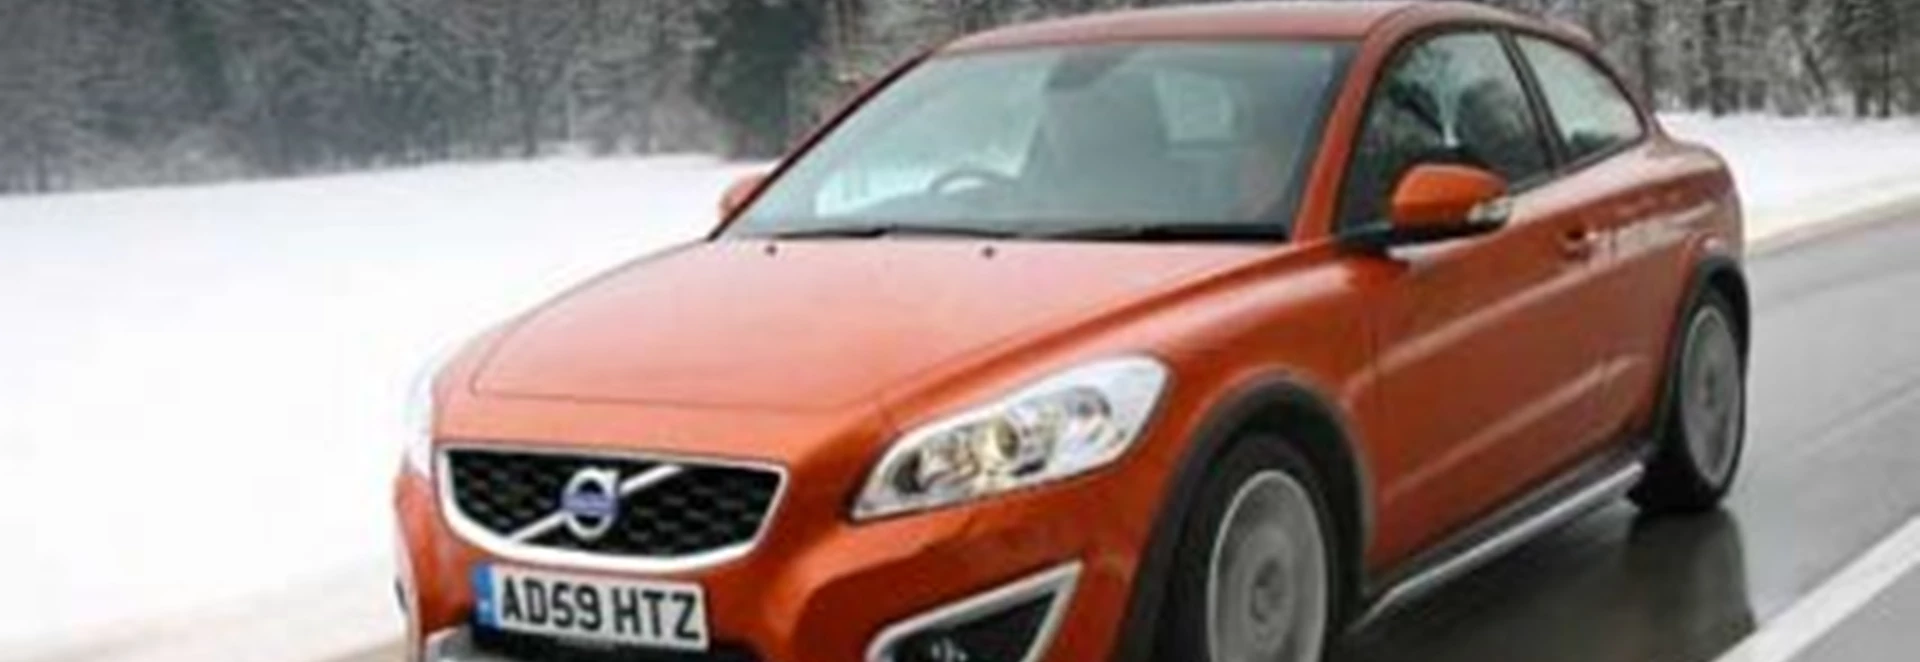 2010 Volvo C30 first drive 